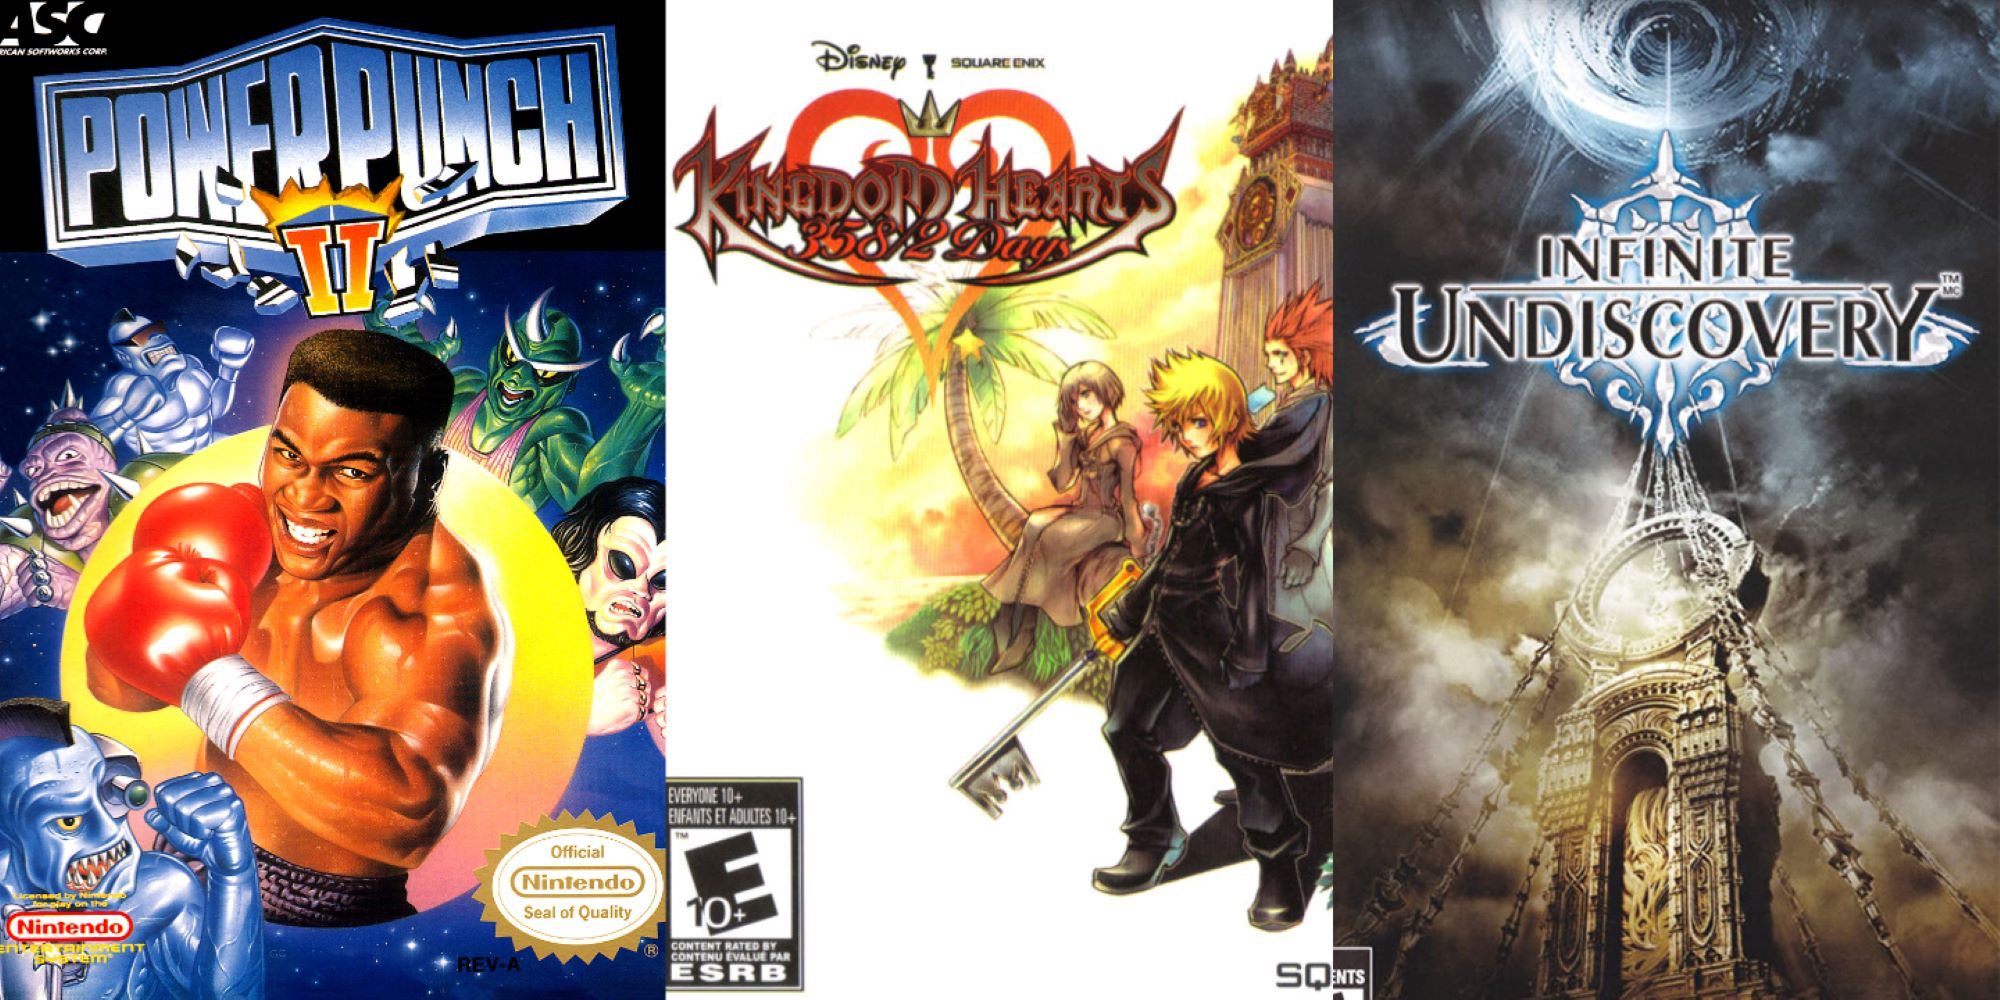 Left- Power Punch II Box Cover, Center- Kingdom Hearts 358/2 Days Box Cover, Right - Infinite Undiscovery Box cover